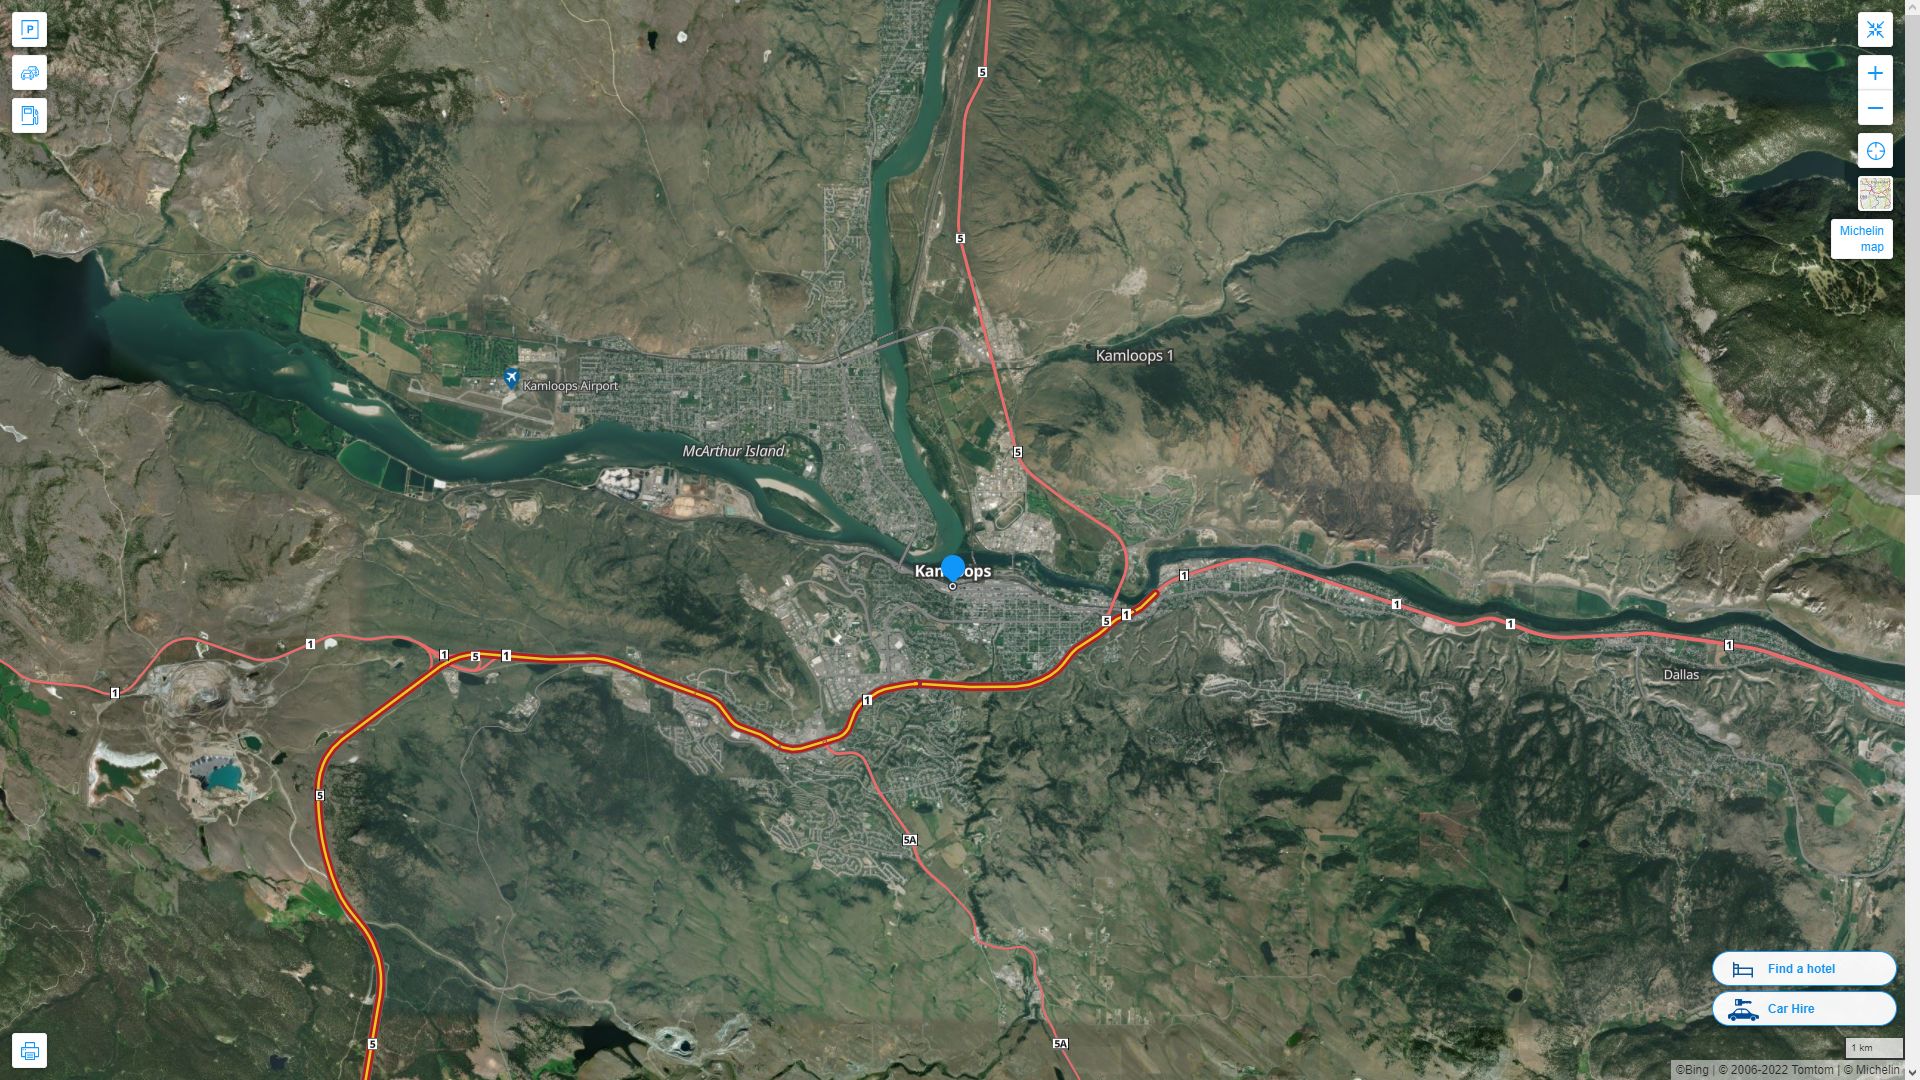 Kamloops Highway and Road Map with Satellite View